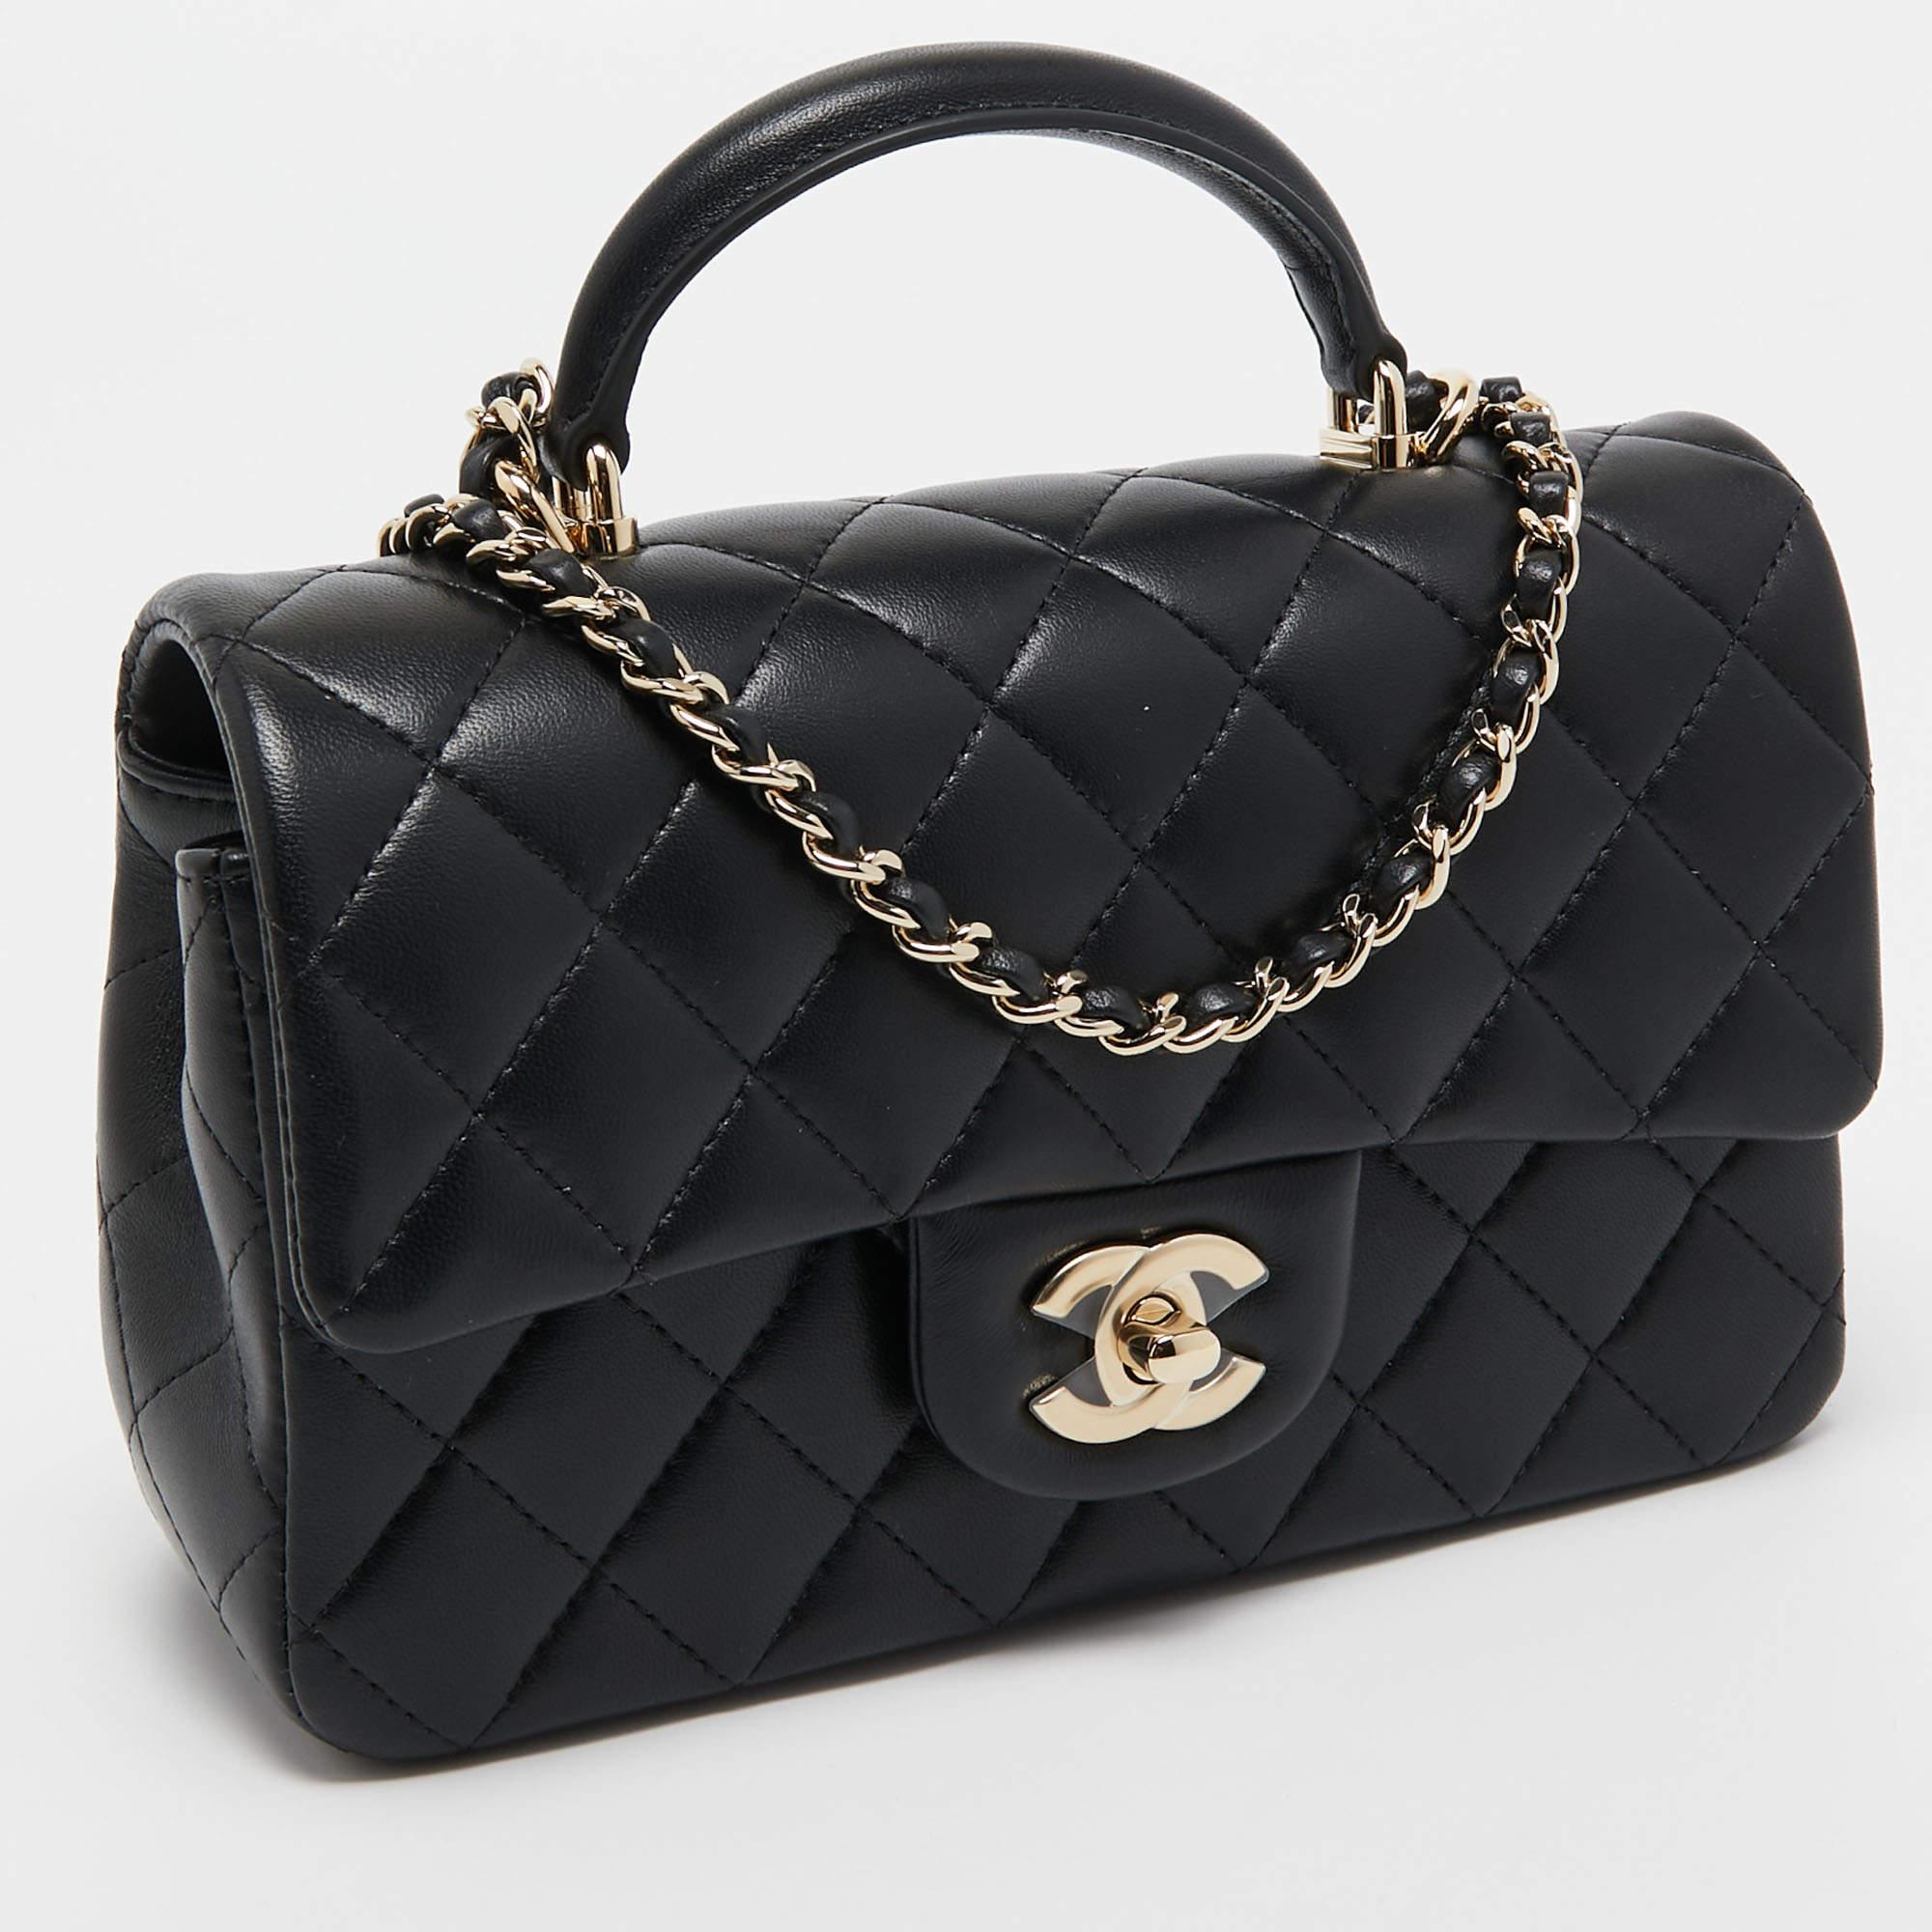 Chanel Black Quilted Leather Mini Rectangular Top Handle Bag 1